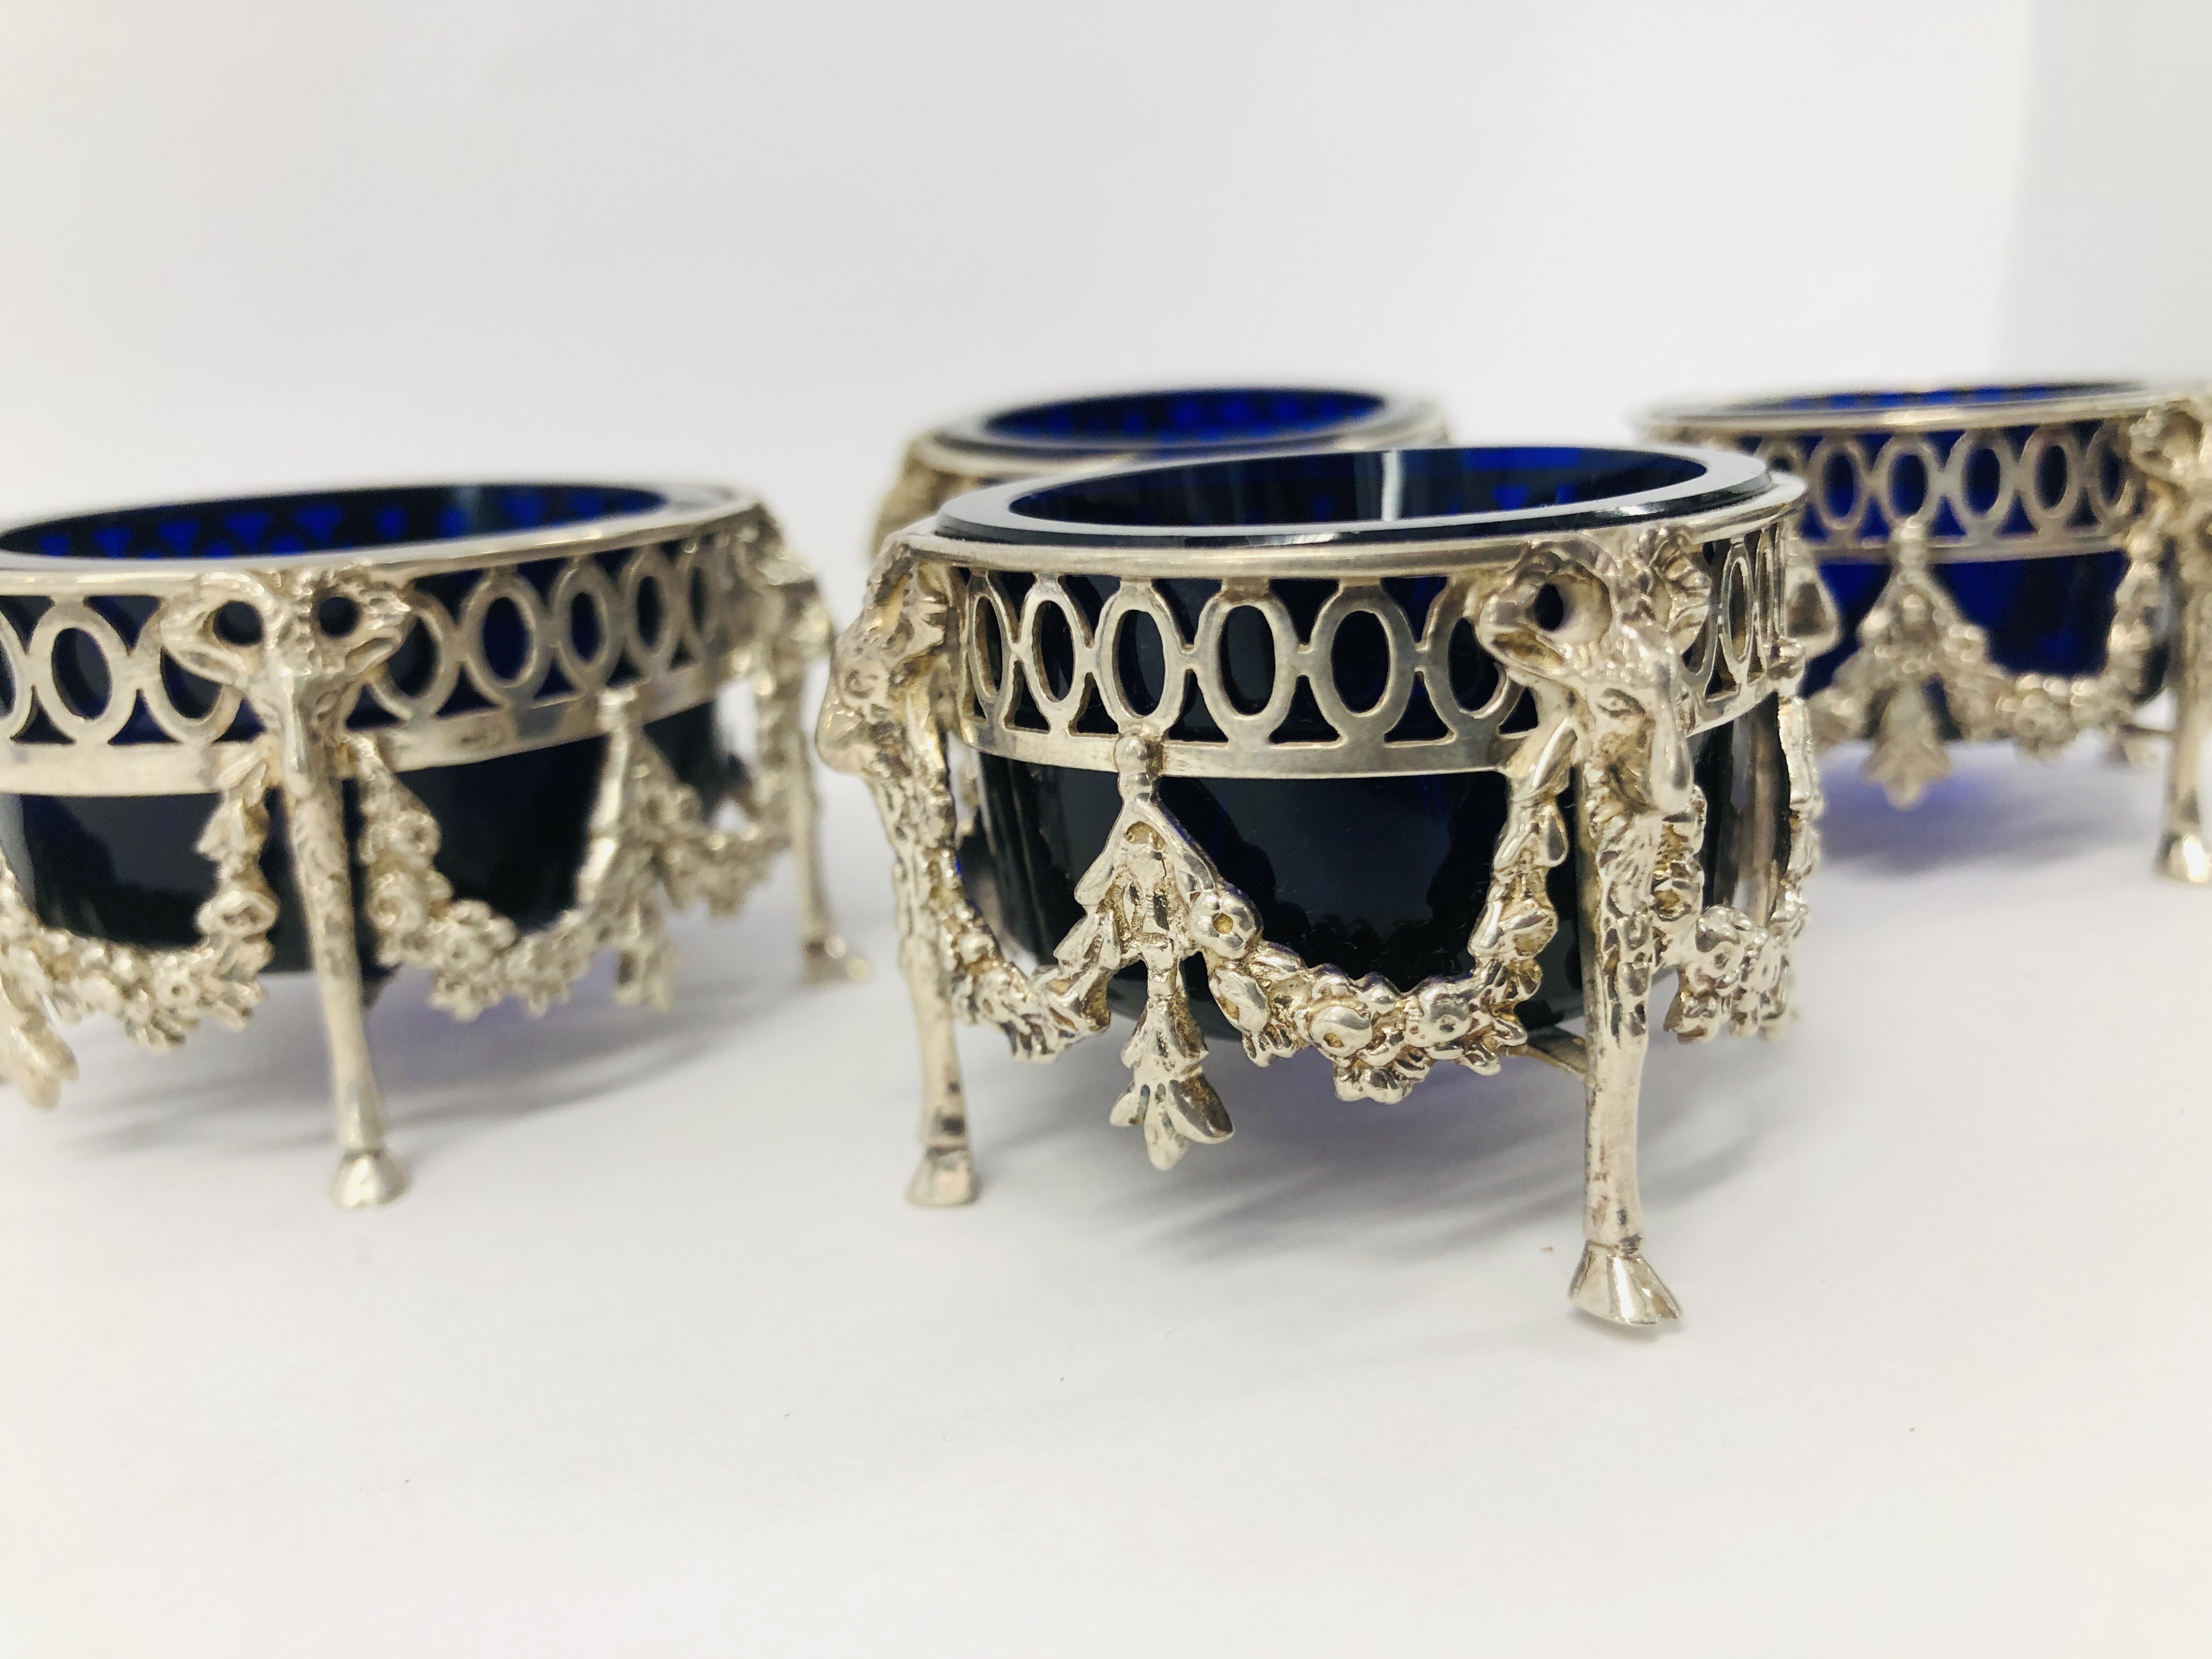 FOUR DUTCH SILVER SALTS WITH BLUE GLASS LINERS (ONE LINER A/F) - Image 2 of 17